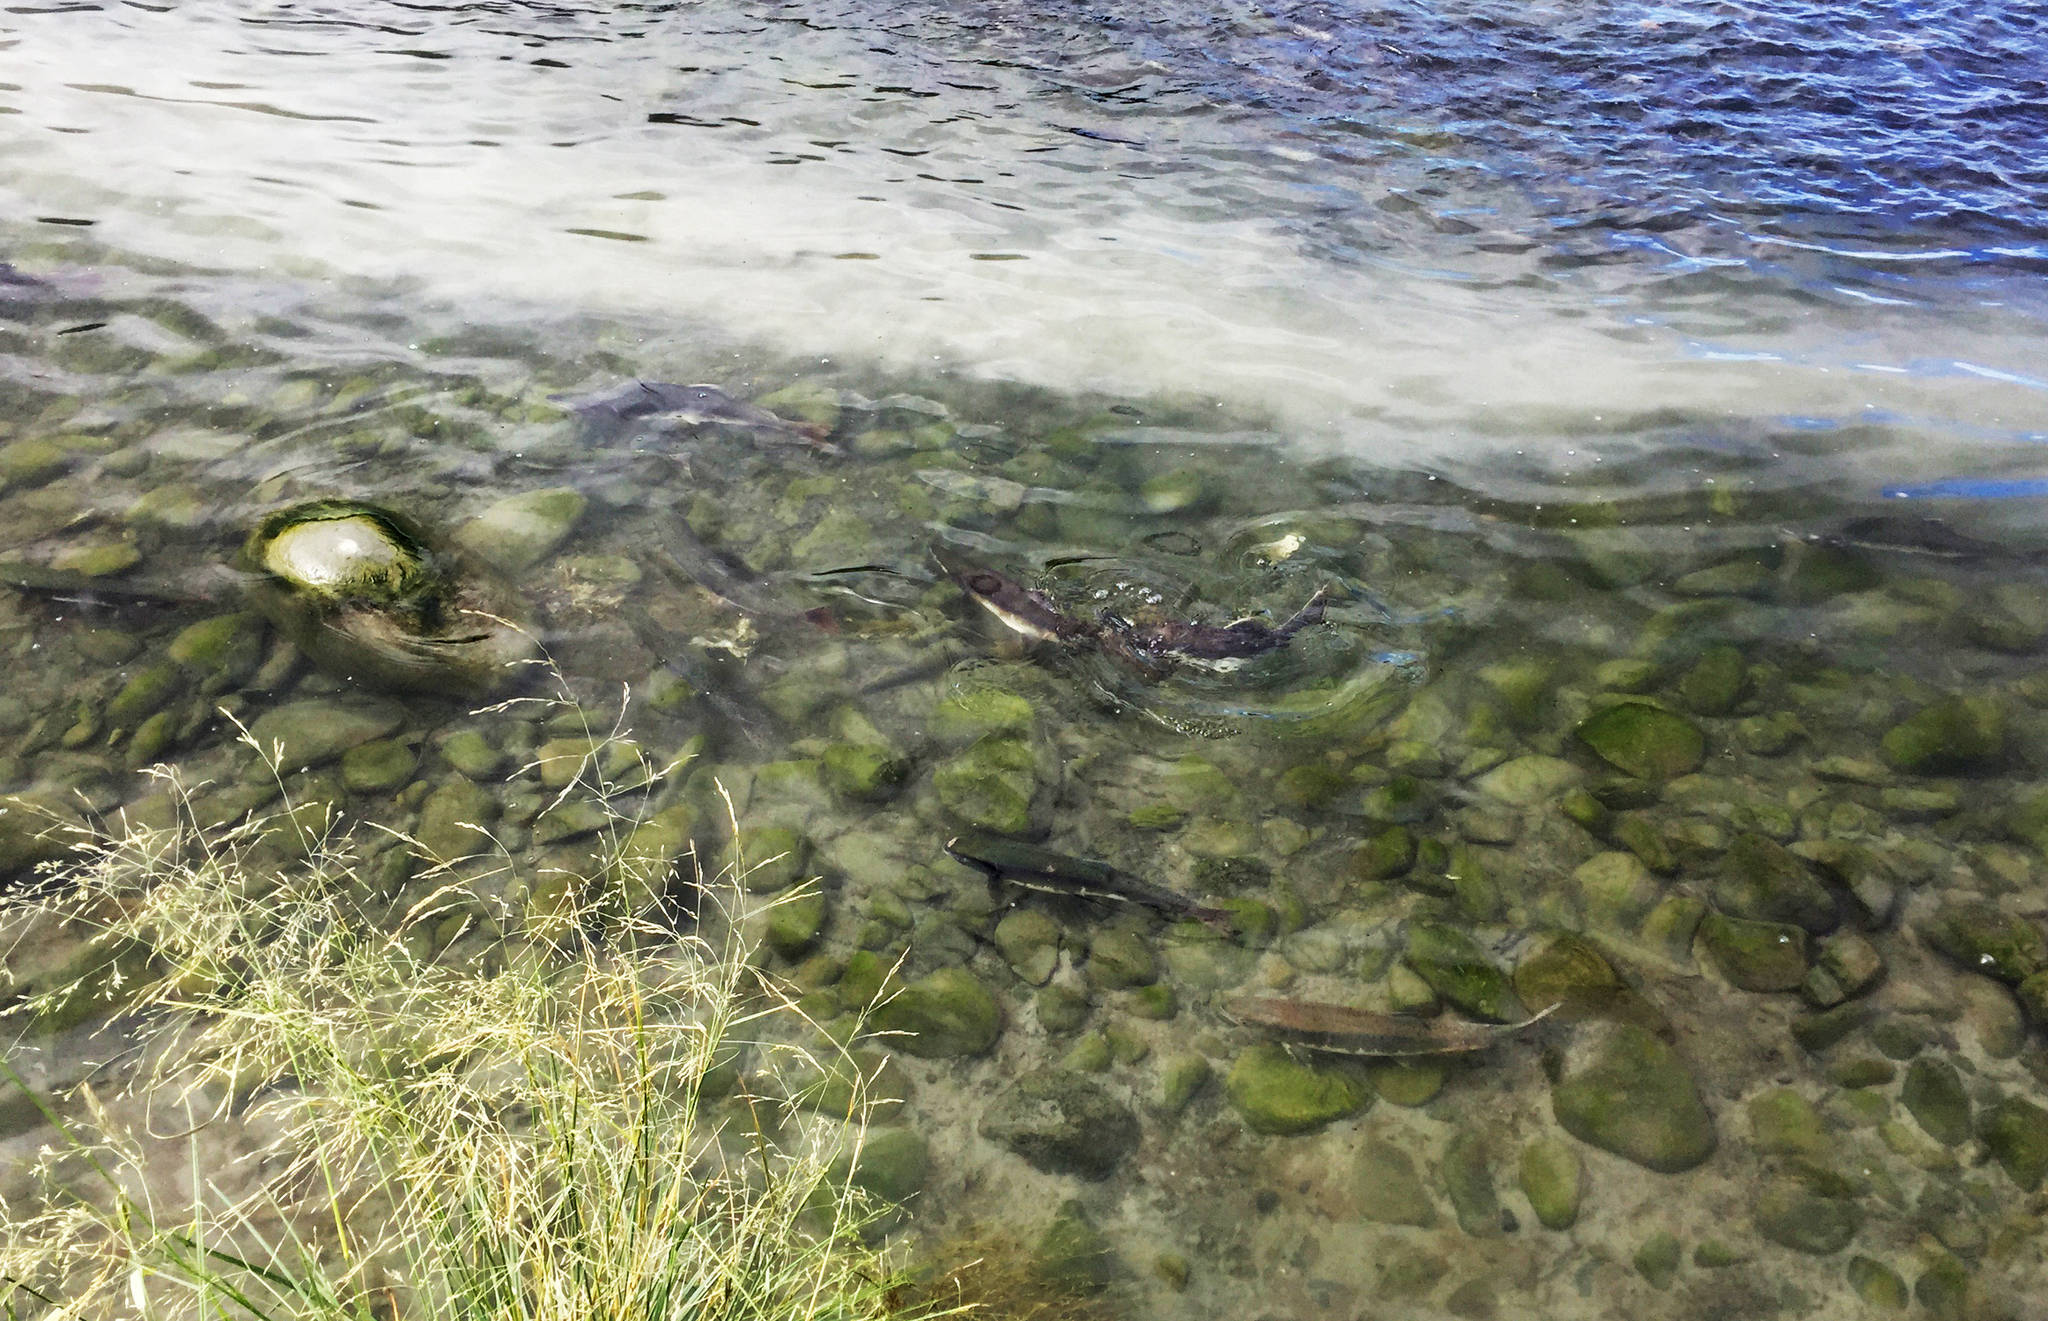 Pink salmon mill in the shallows of Resurrection Creek near its confluence with Cook Inlet on Sunday, Aug. 13, 2017 in Hope, Alaska. Pink salmon can return to the river in large numbers in the late summer and early fall. (Photo by Elizabeth Earl/Peninsula Clarion, file)